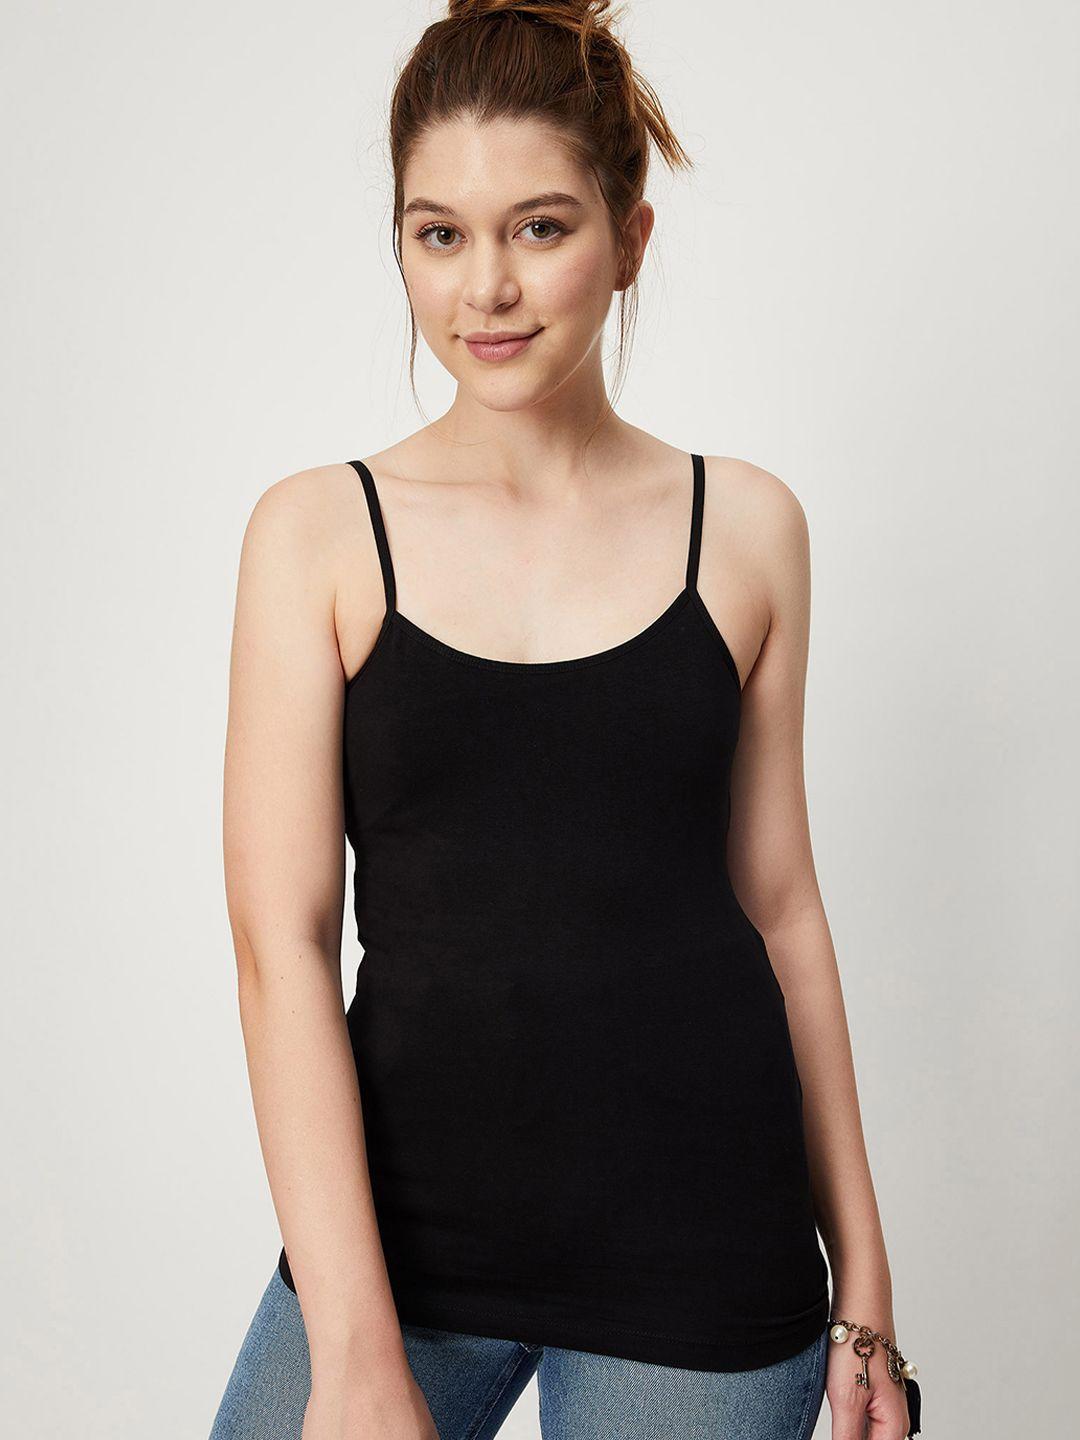 max-women-shoulder-strap-non-padded-camisoles